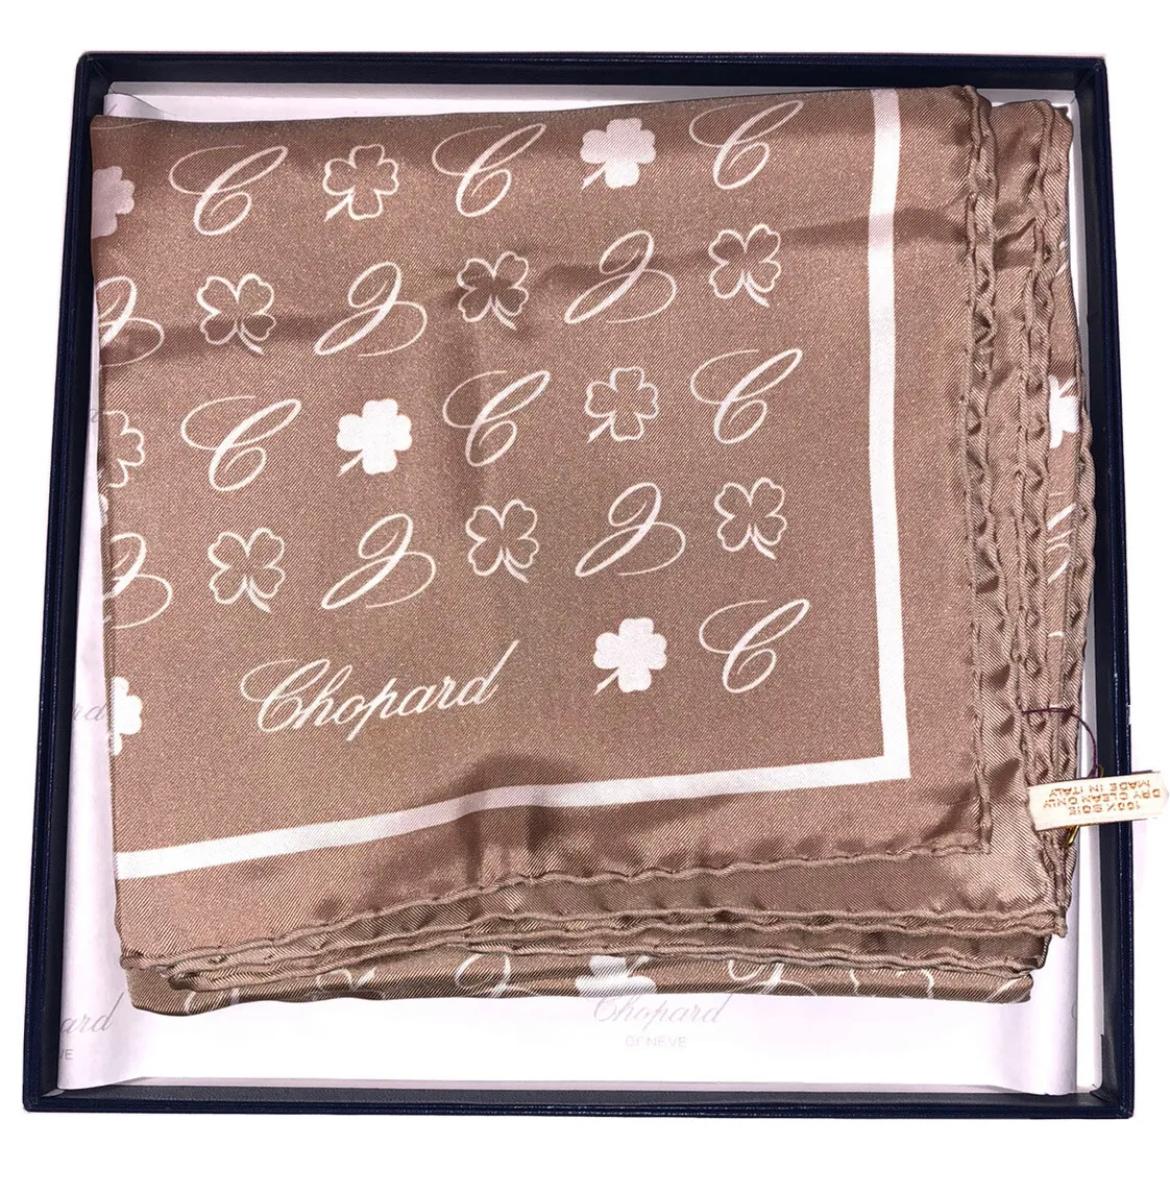 Chopard Silk Scarf Foulard Logos Beige W/ White Chamrocks And Chopard “C’s”

Made in Italy  100% Silk  90cm \ 35inches Square

Dry Clean Only. Gently Used with Box

Foxy Couture is not an authorized reseller nor affiliated with any of the brands we